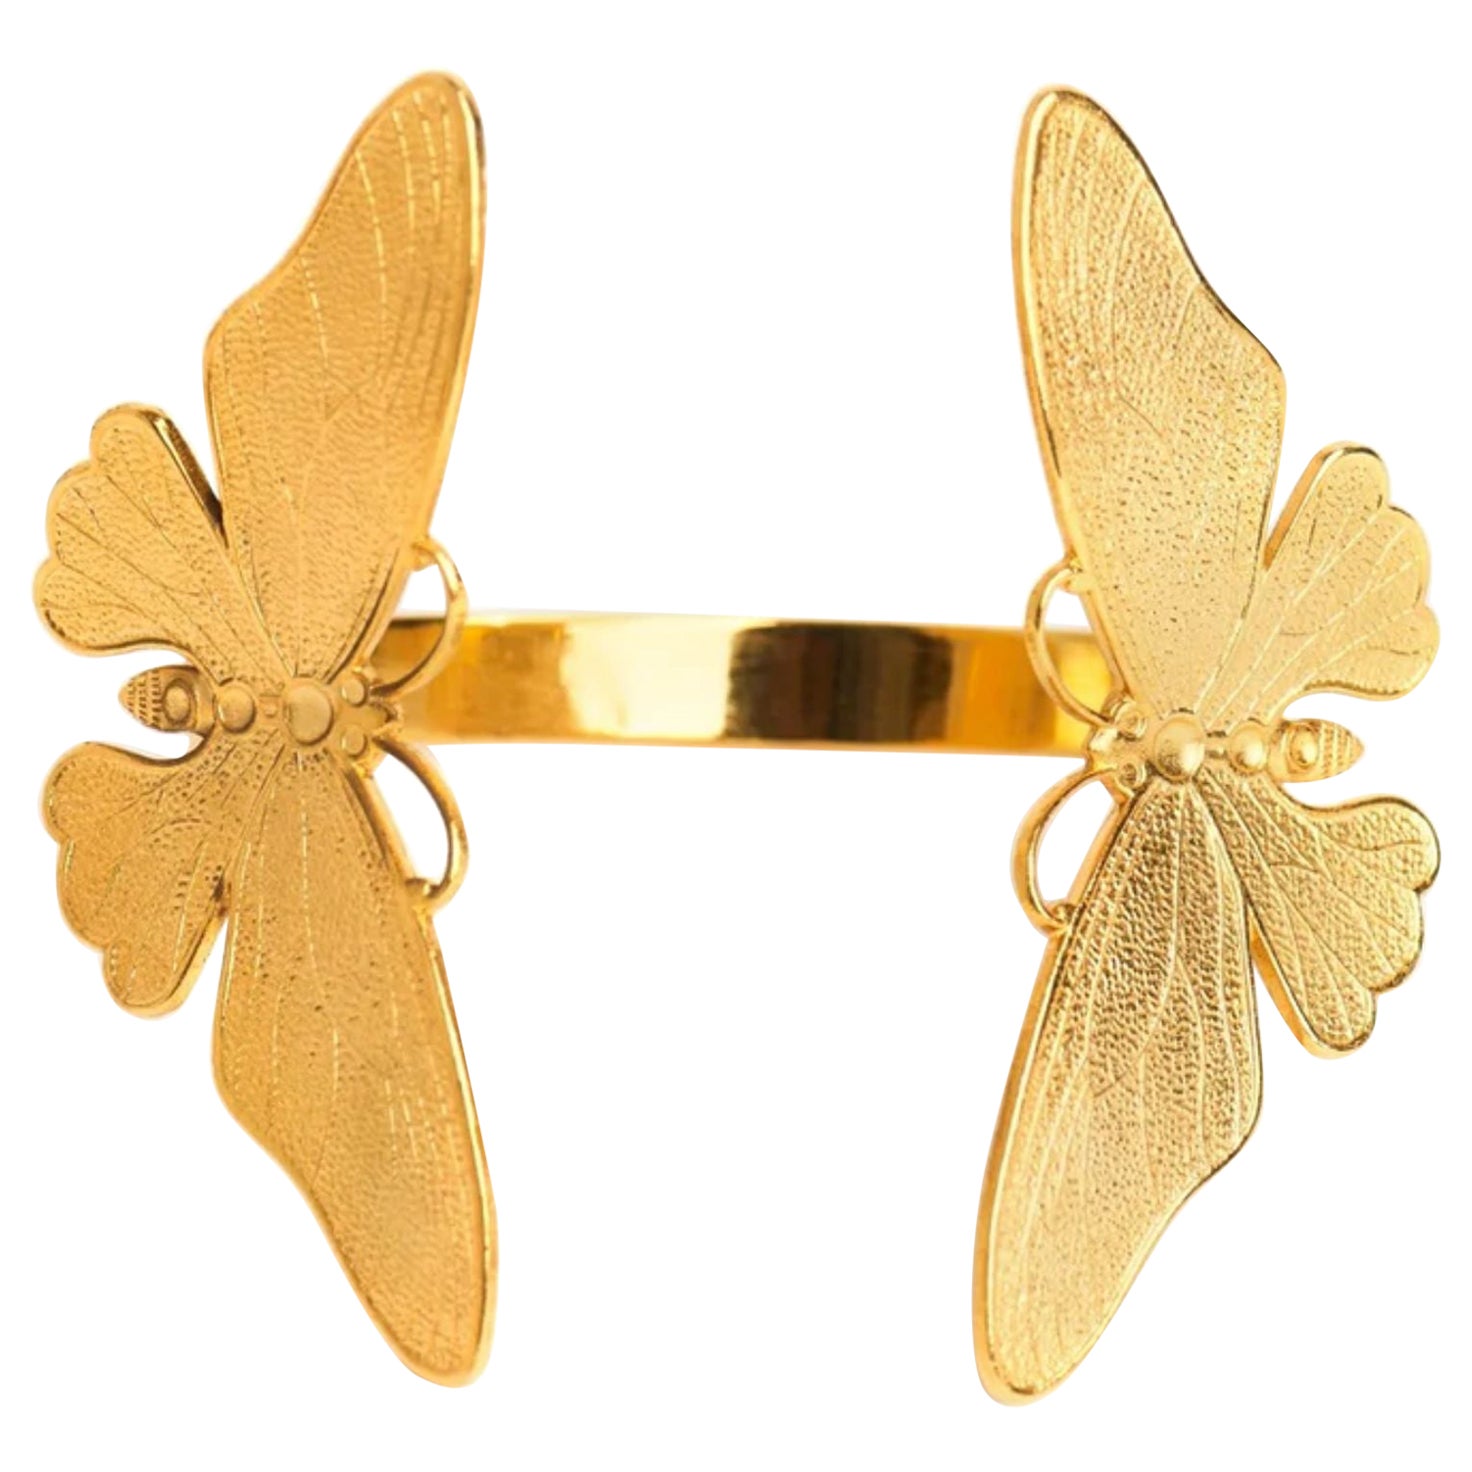 Butterfly Cuff in 24K Gold with Butterfly Symbolism